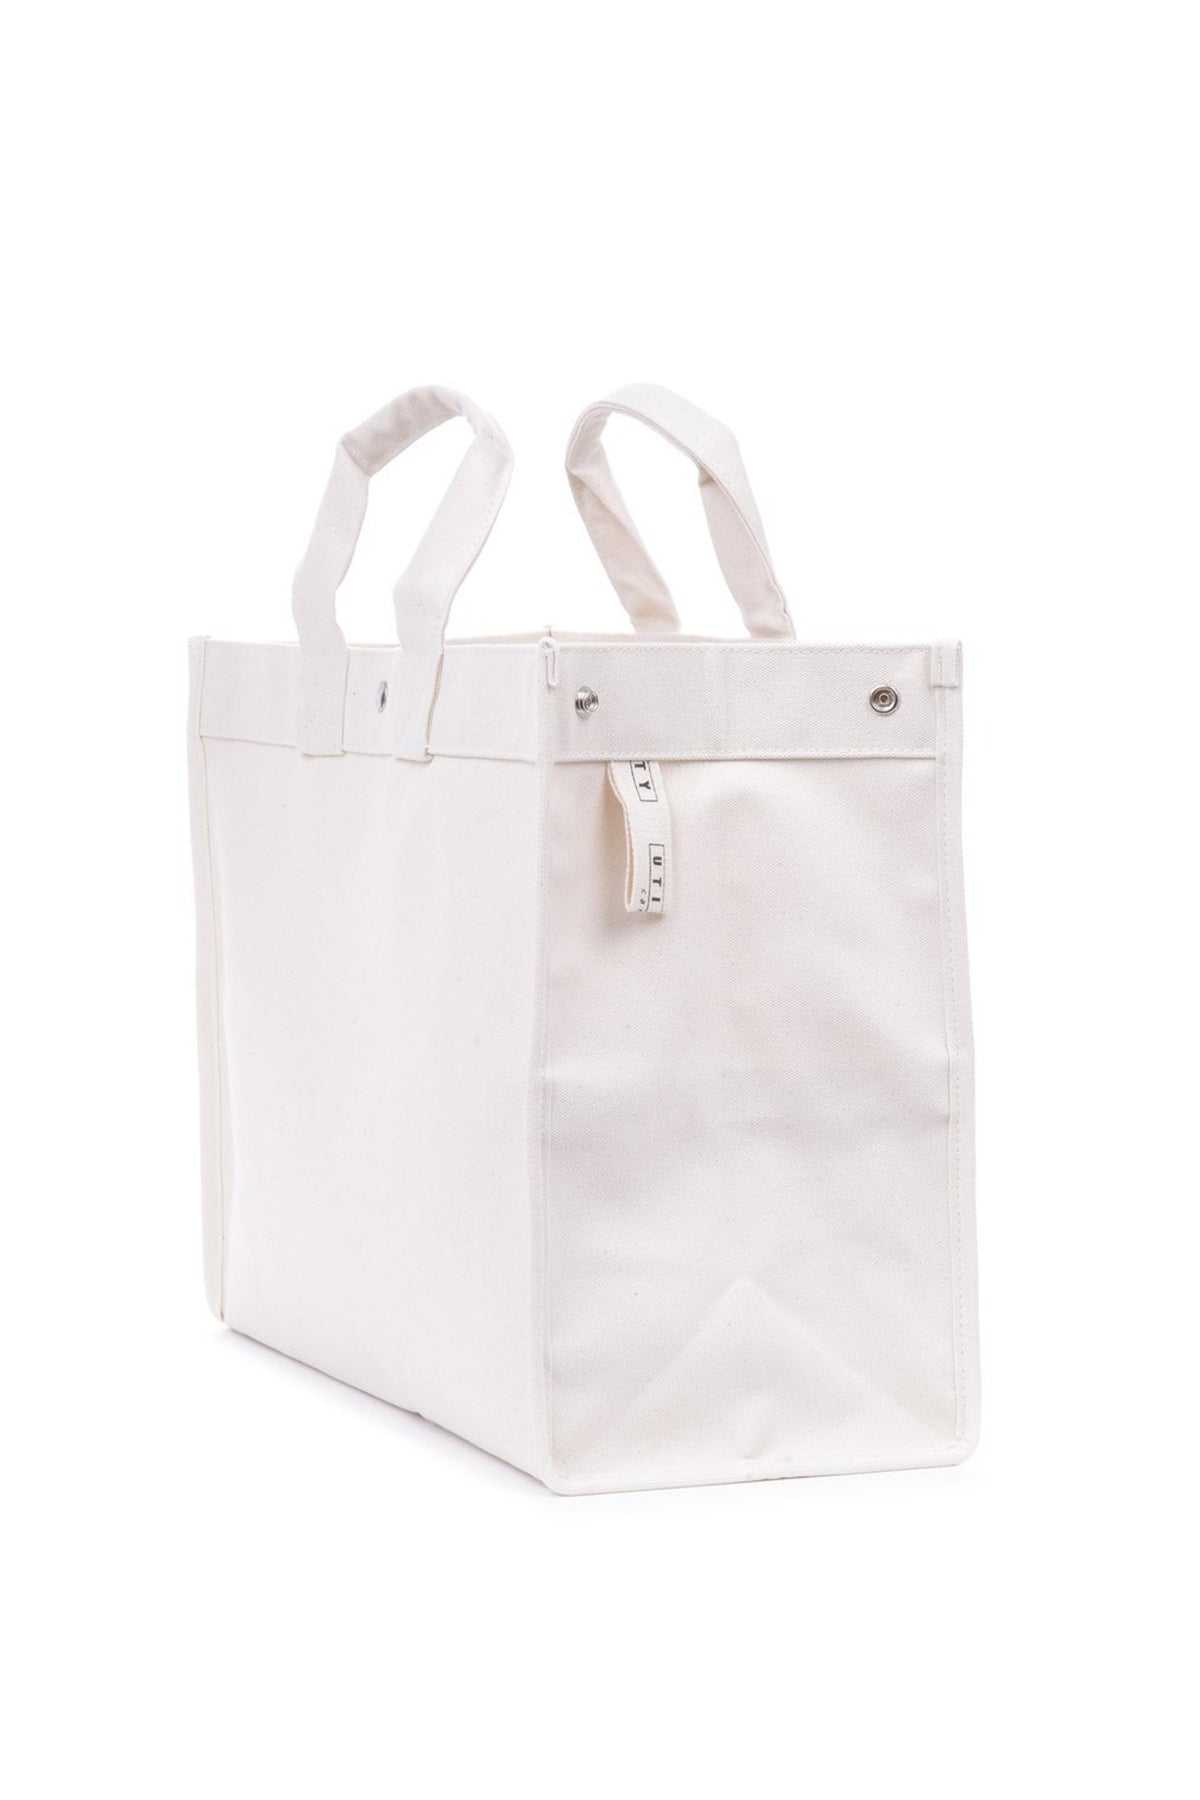 a CLASSIC FIELD BAG BY UTILITY CANVAS on a white background.-17386780623041